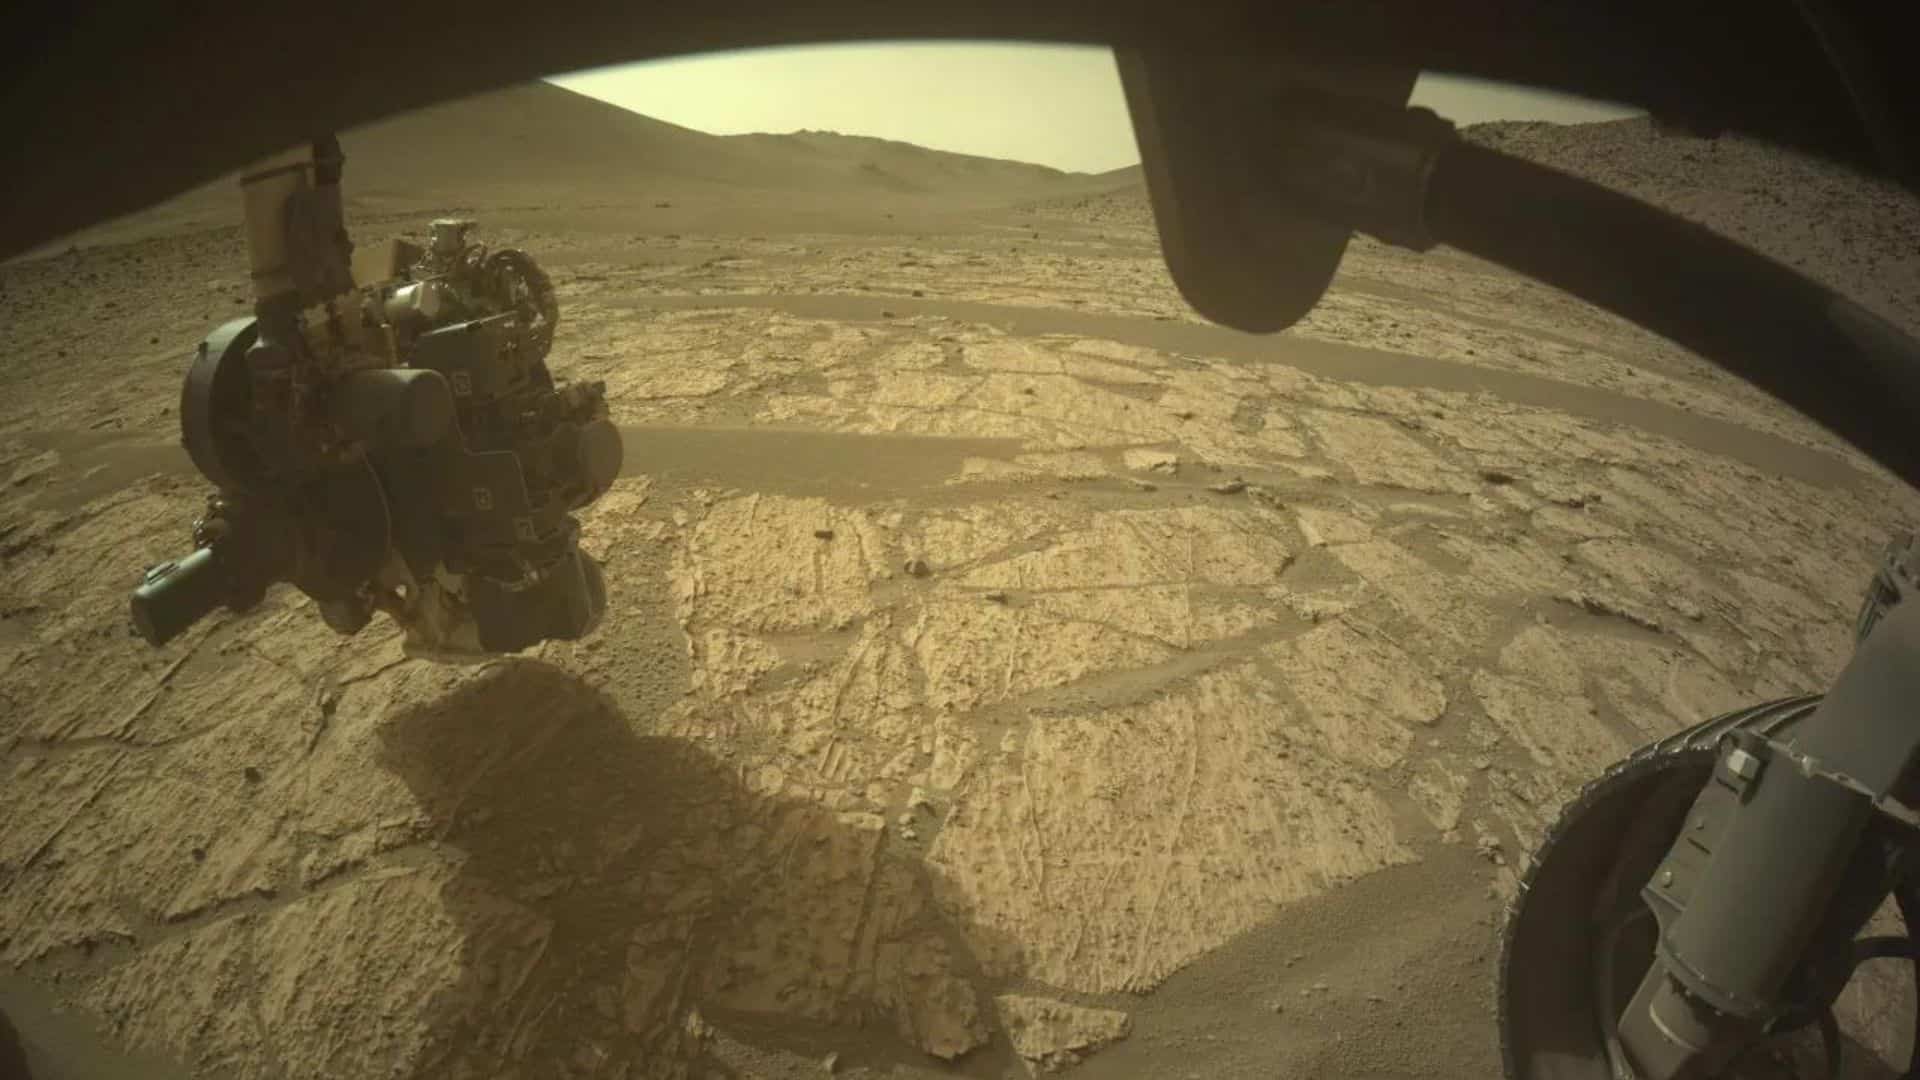 The PIXL instrument of NASA's Perseverance rover investigates the rock surface of Bright Angel